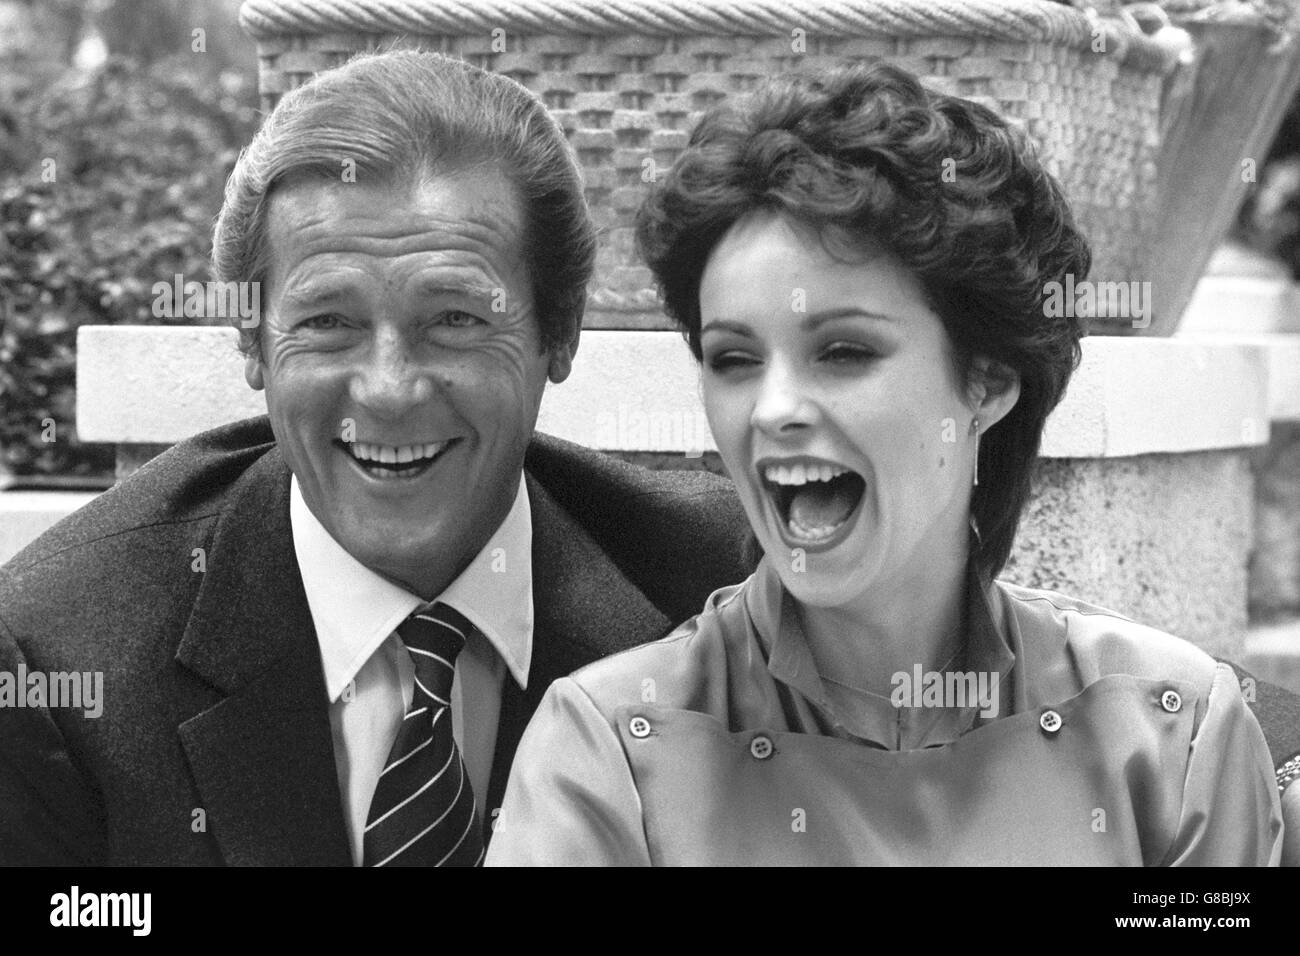 Roger Moore with Sheena Easton in London today. Sheena sings the theme song to the new James Bond film For Your Eyes Only, which opens in London tomorrow night. Moore makes his fifth appearance as Bond in the film. Stock Photo